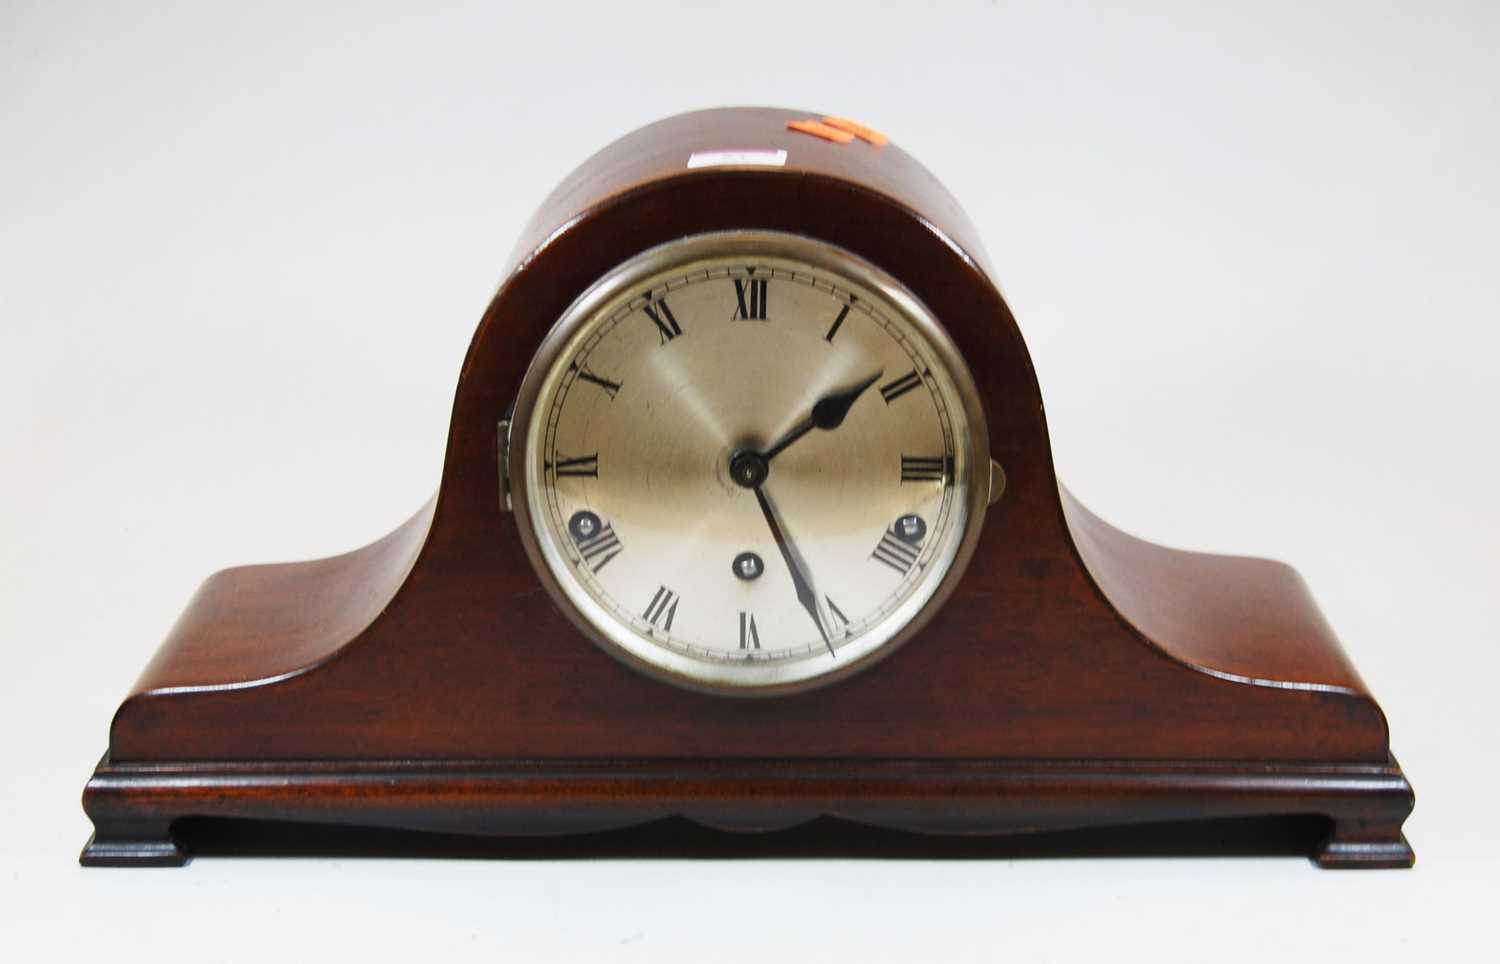 An early 20th century mahogany cased mantel clock, the silvered dial showing Roman numerals,having